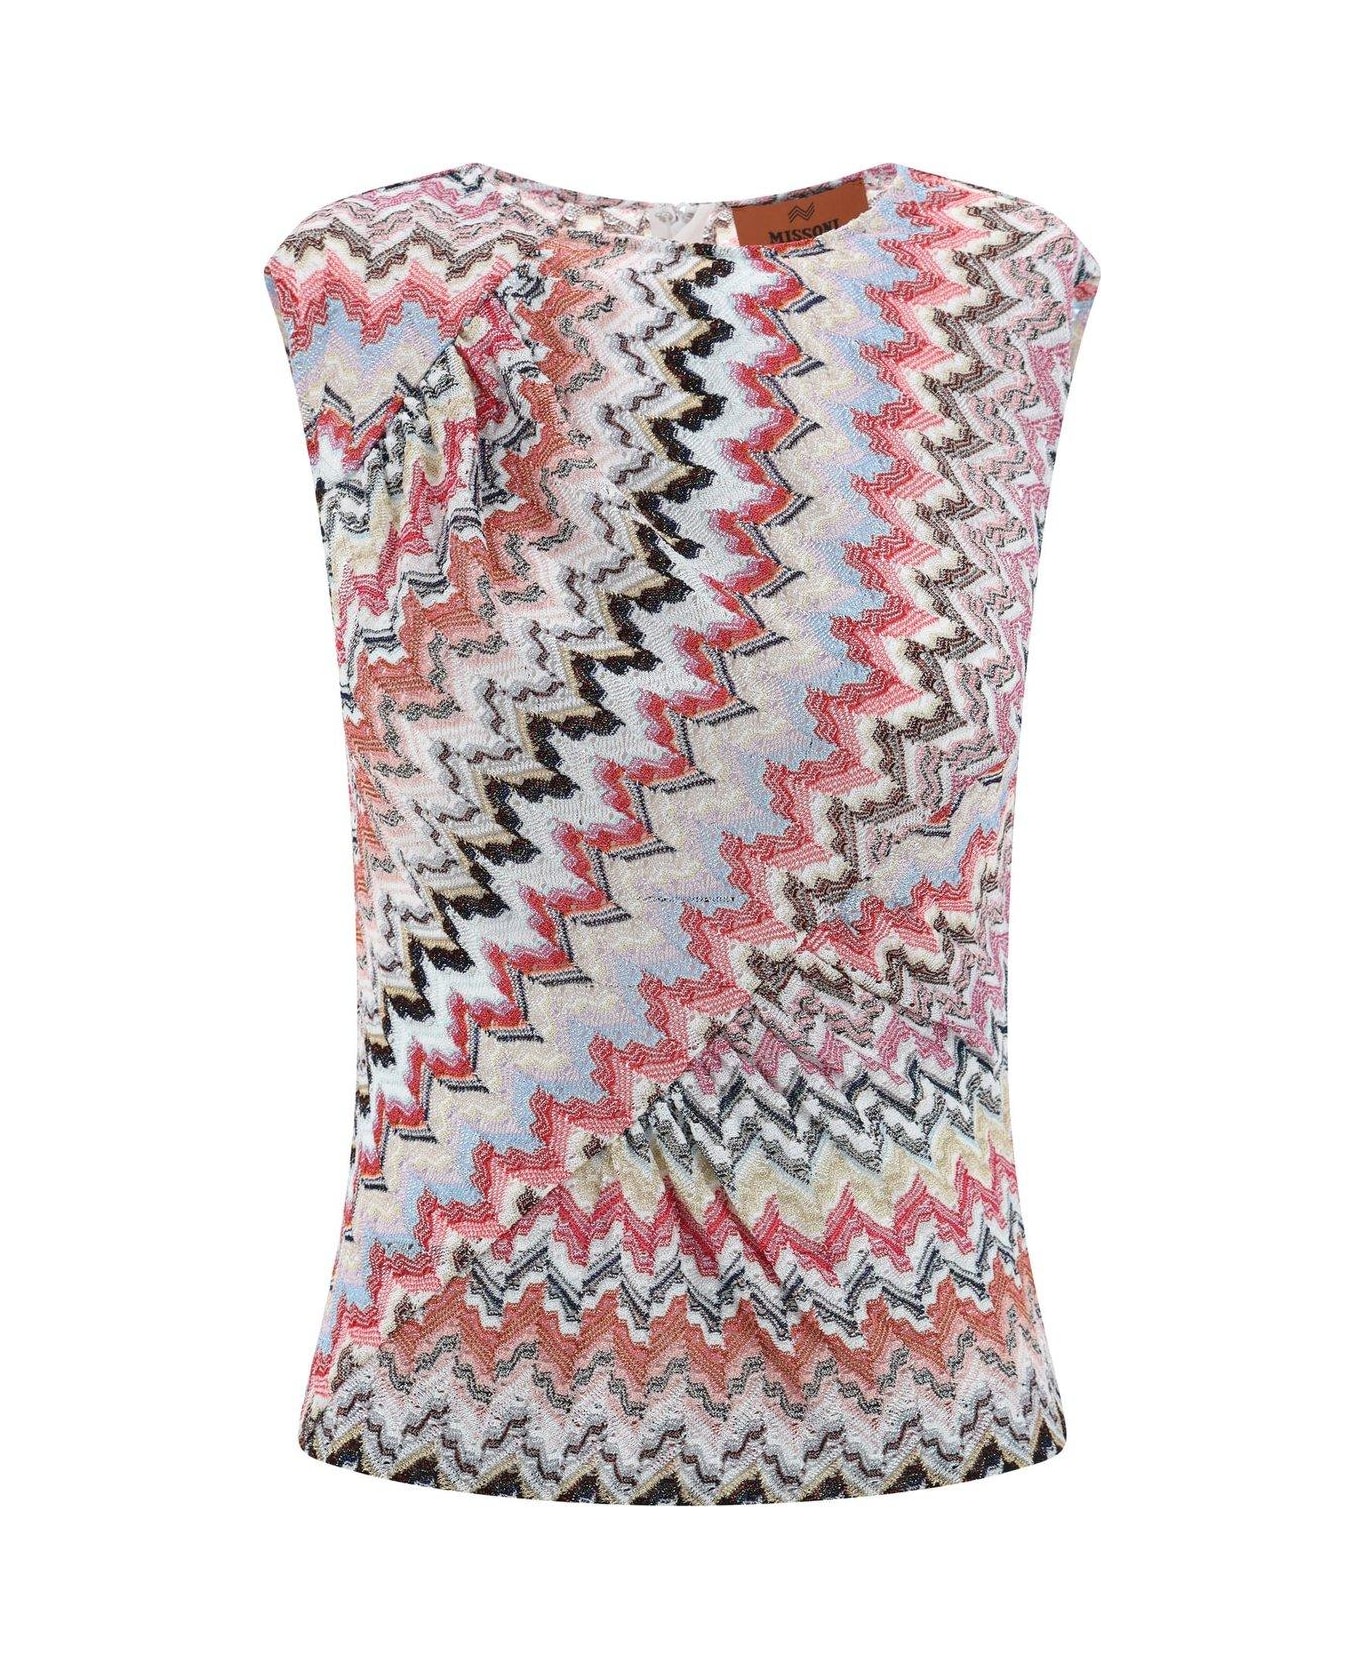 Missoni Zigzag Pattern Knitted Sleeveless Top - Pink Wht Tone Multic トップス